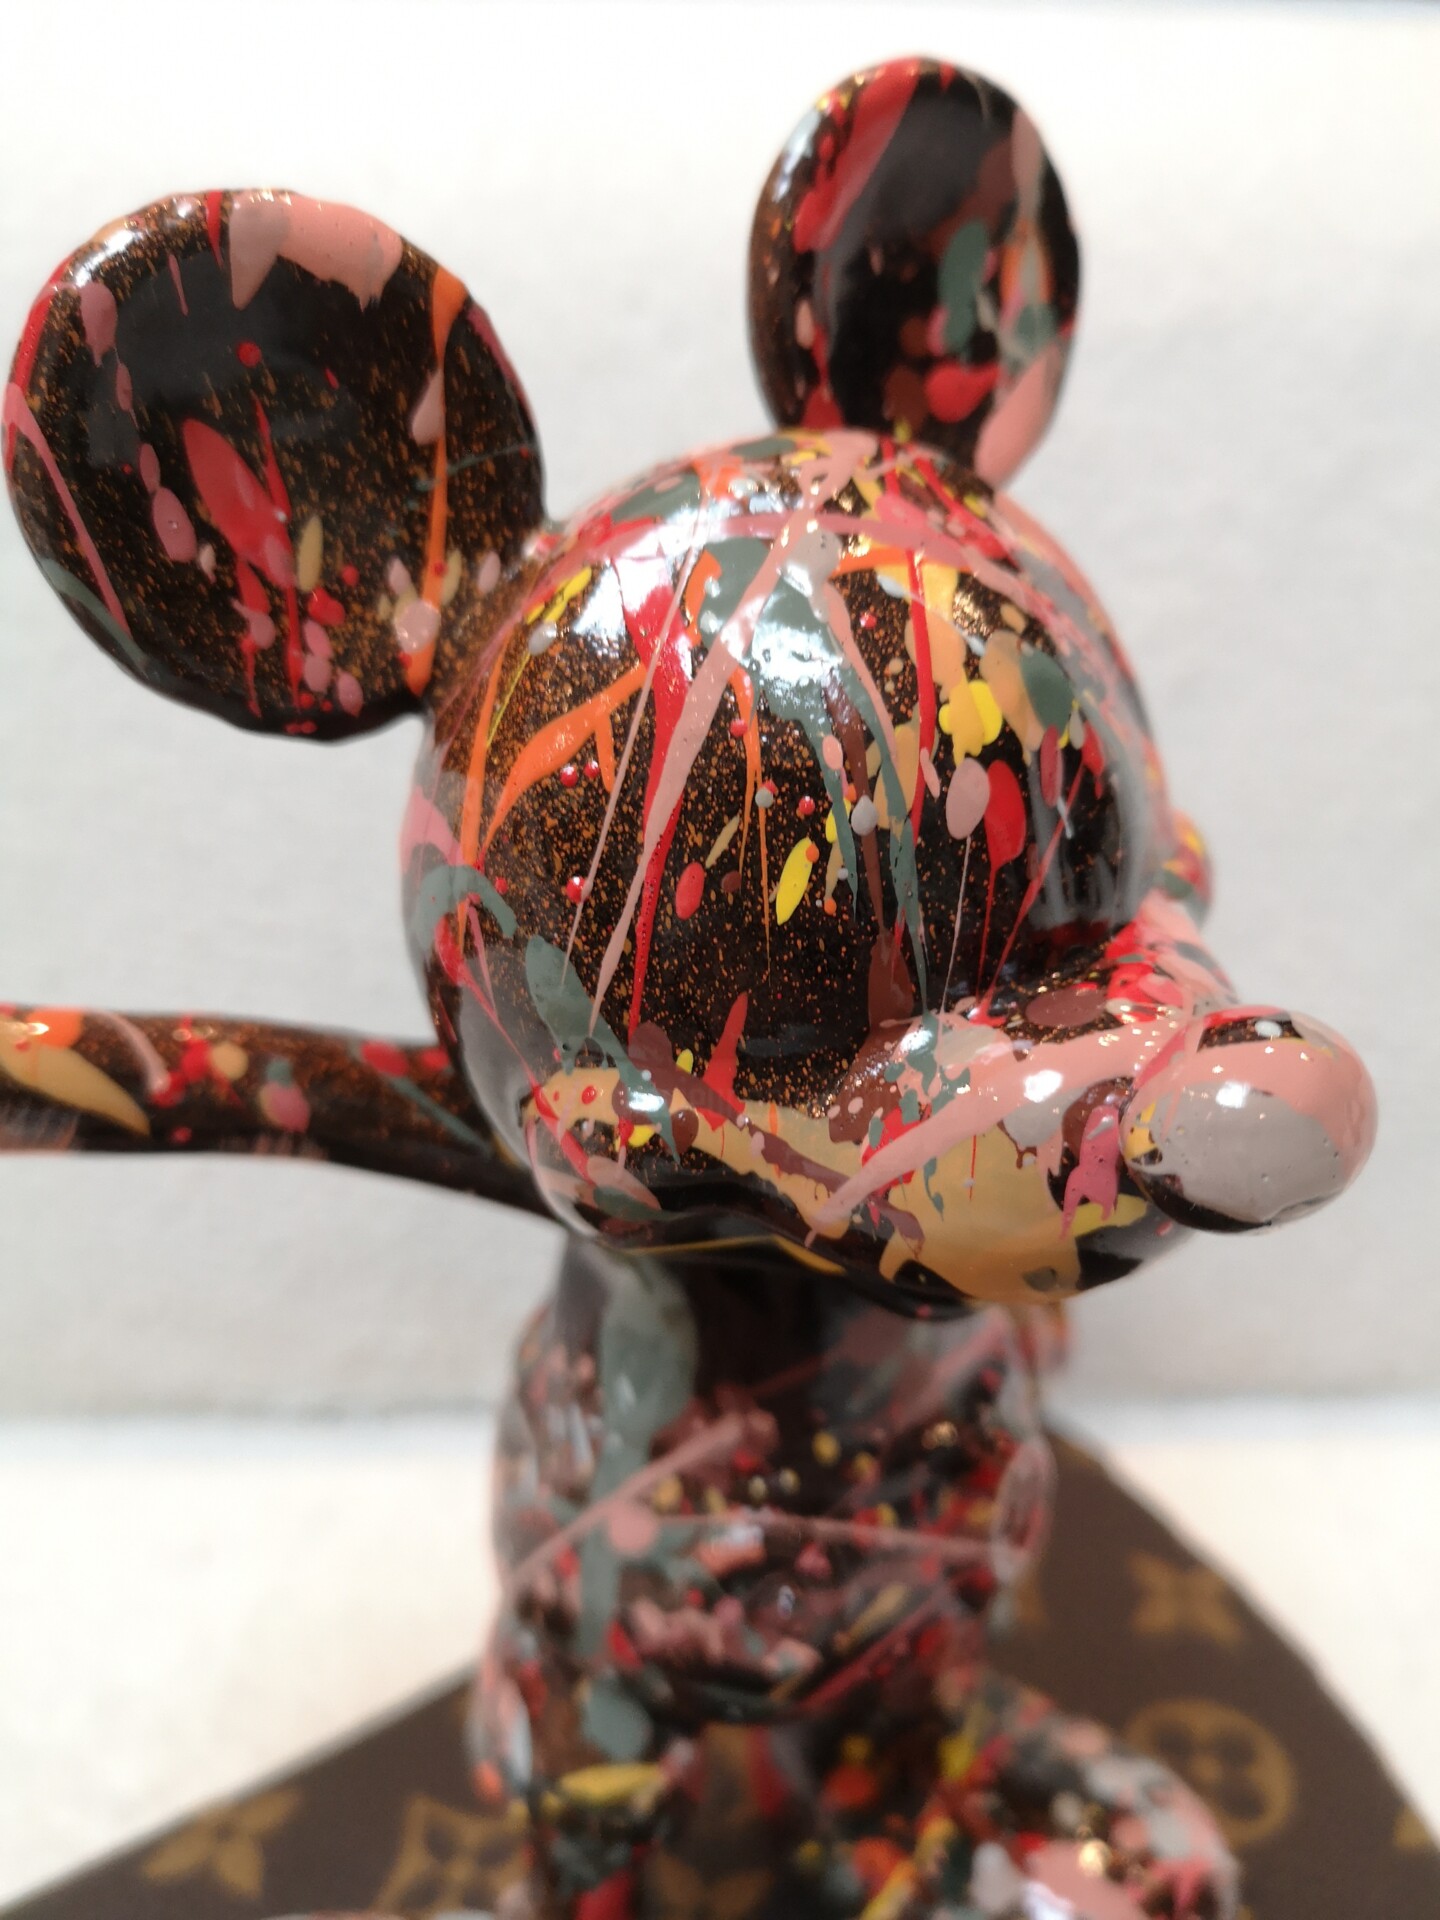 Louis Vuitton X Mickey Mouse; Welcome, Sculpture by Brother X